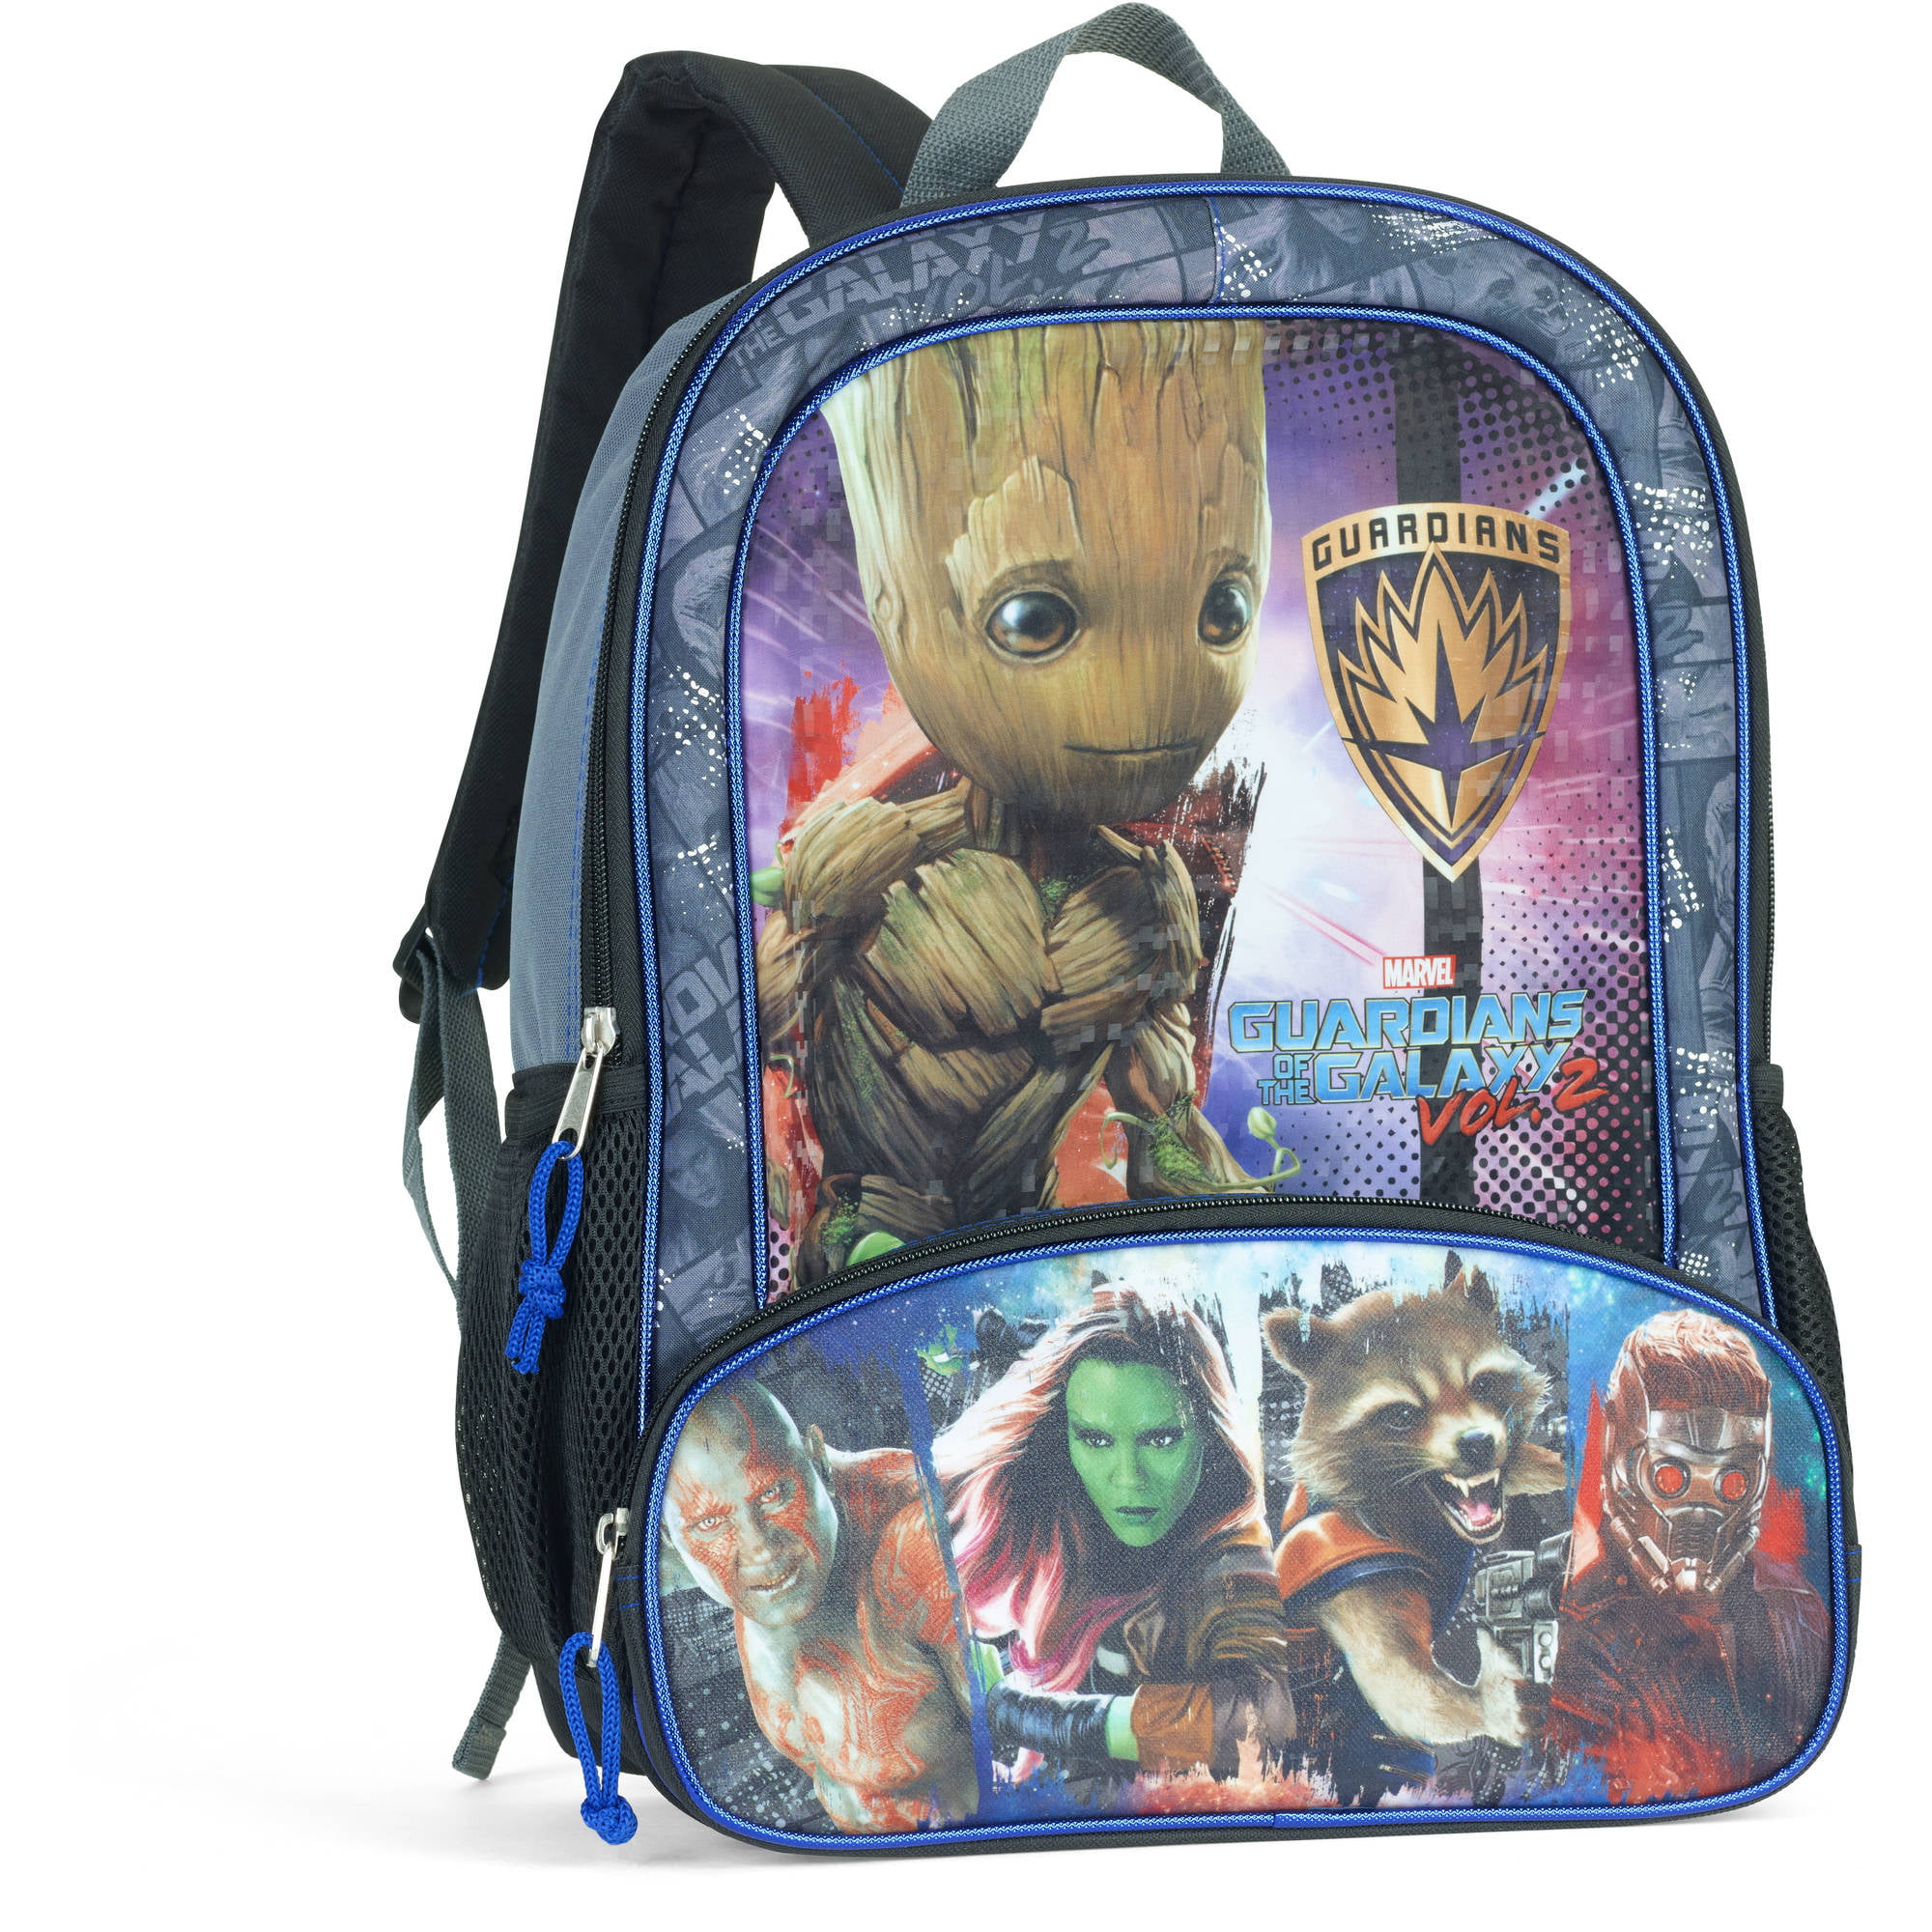 Guardian of The Galaxy GROOT 16" Backpack Back to School Book Bag for Kids 